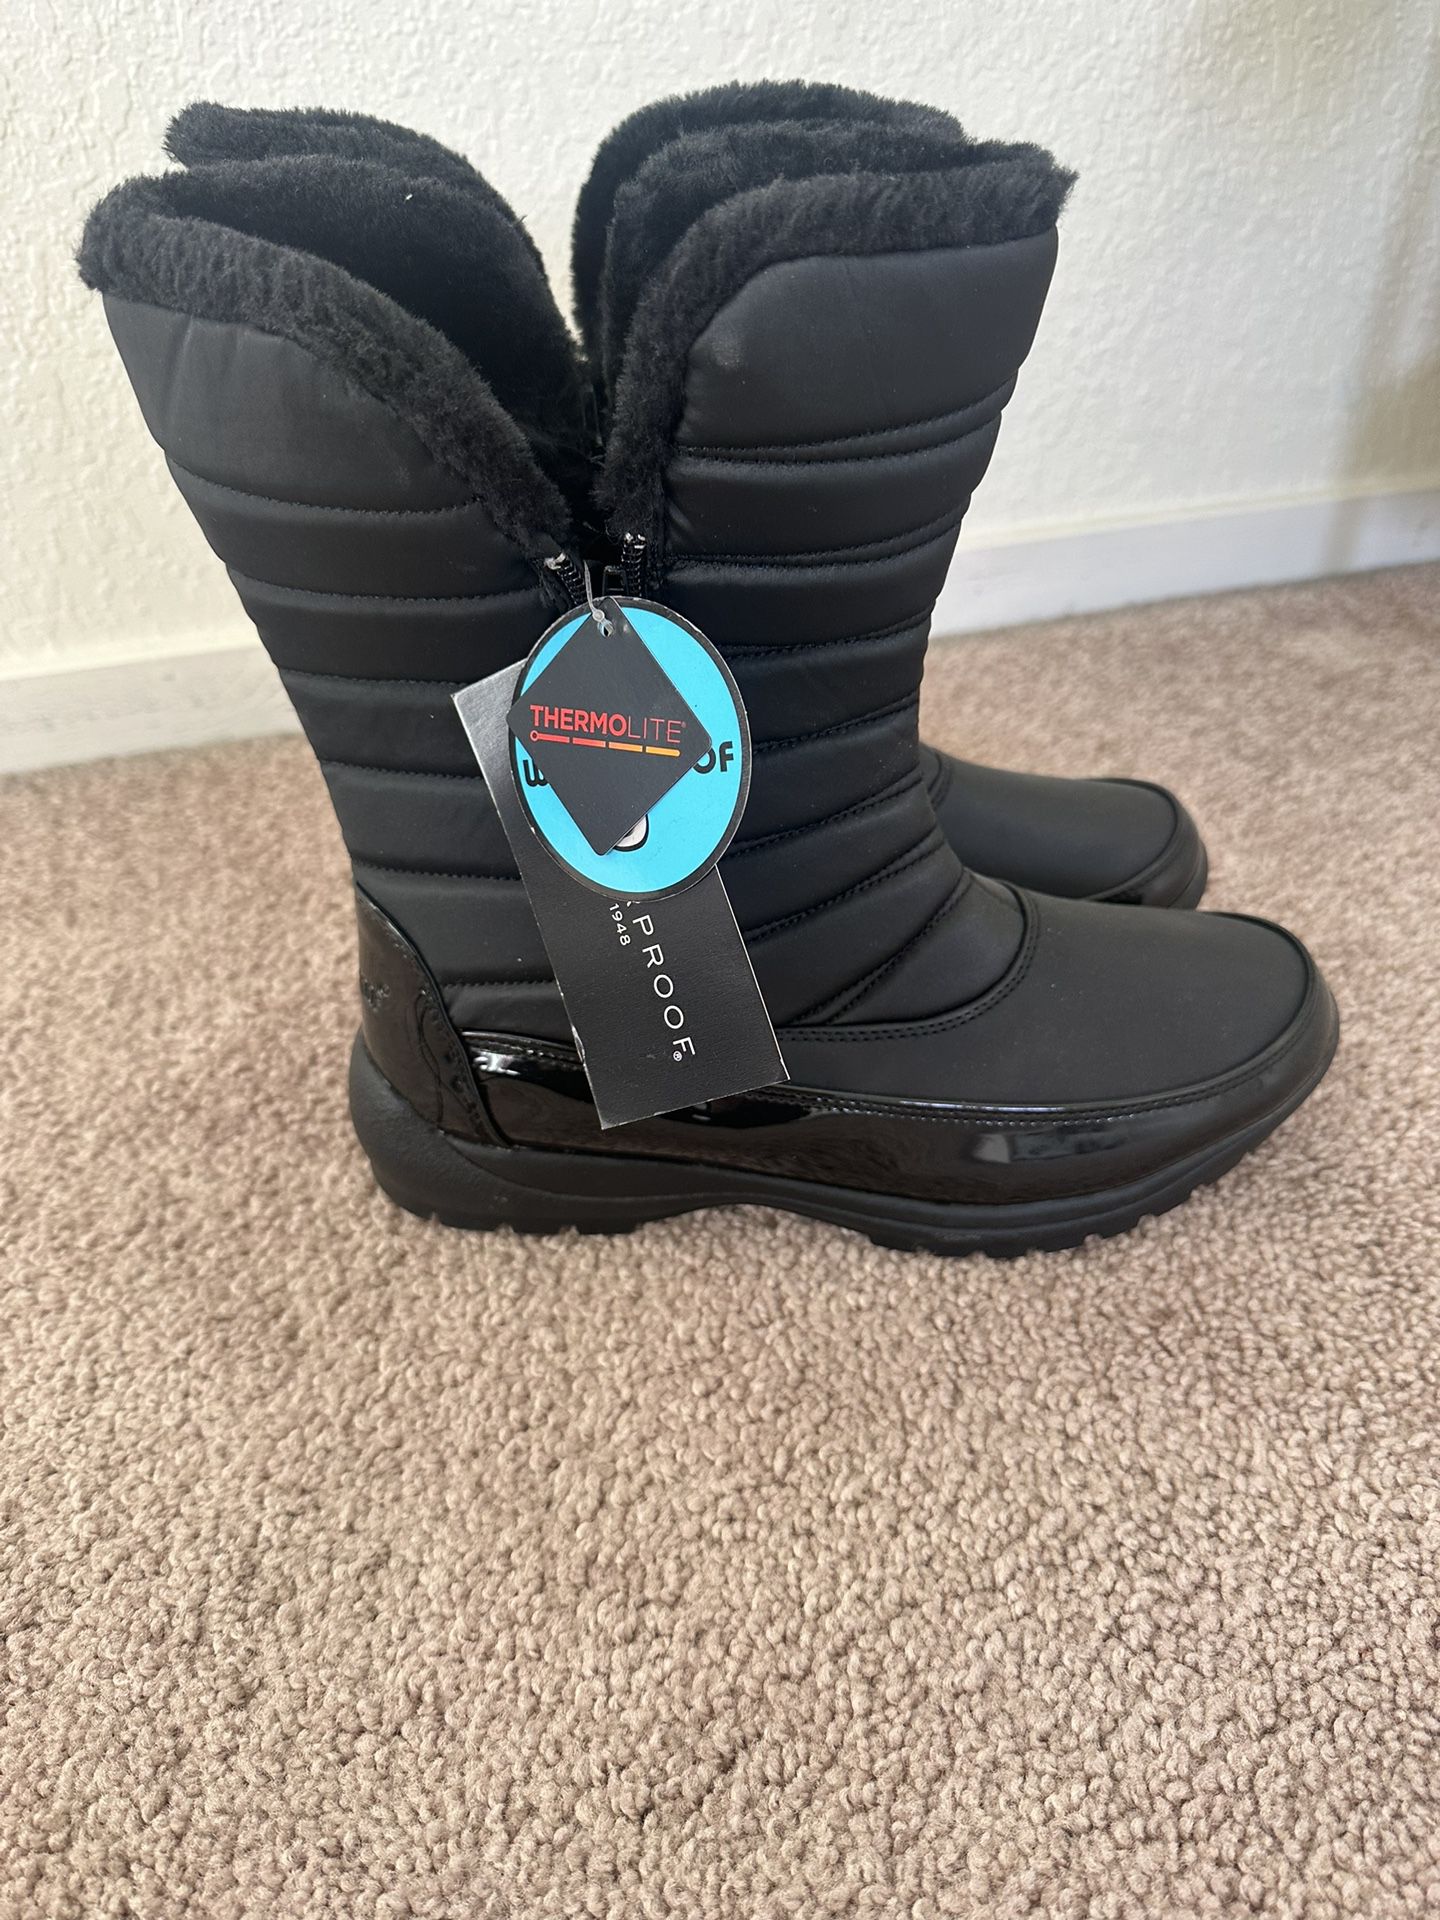 New Women’s Snow Boots Size 9 